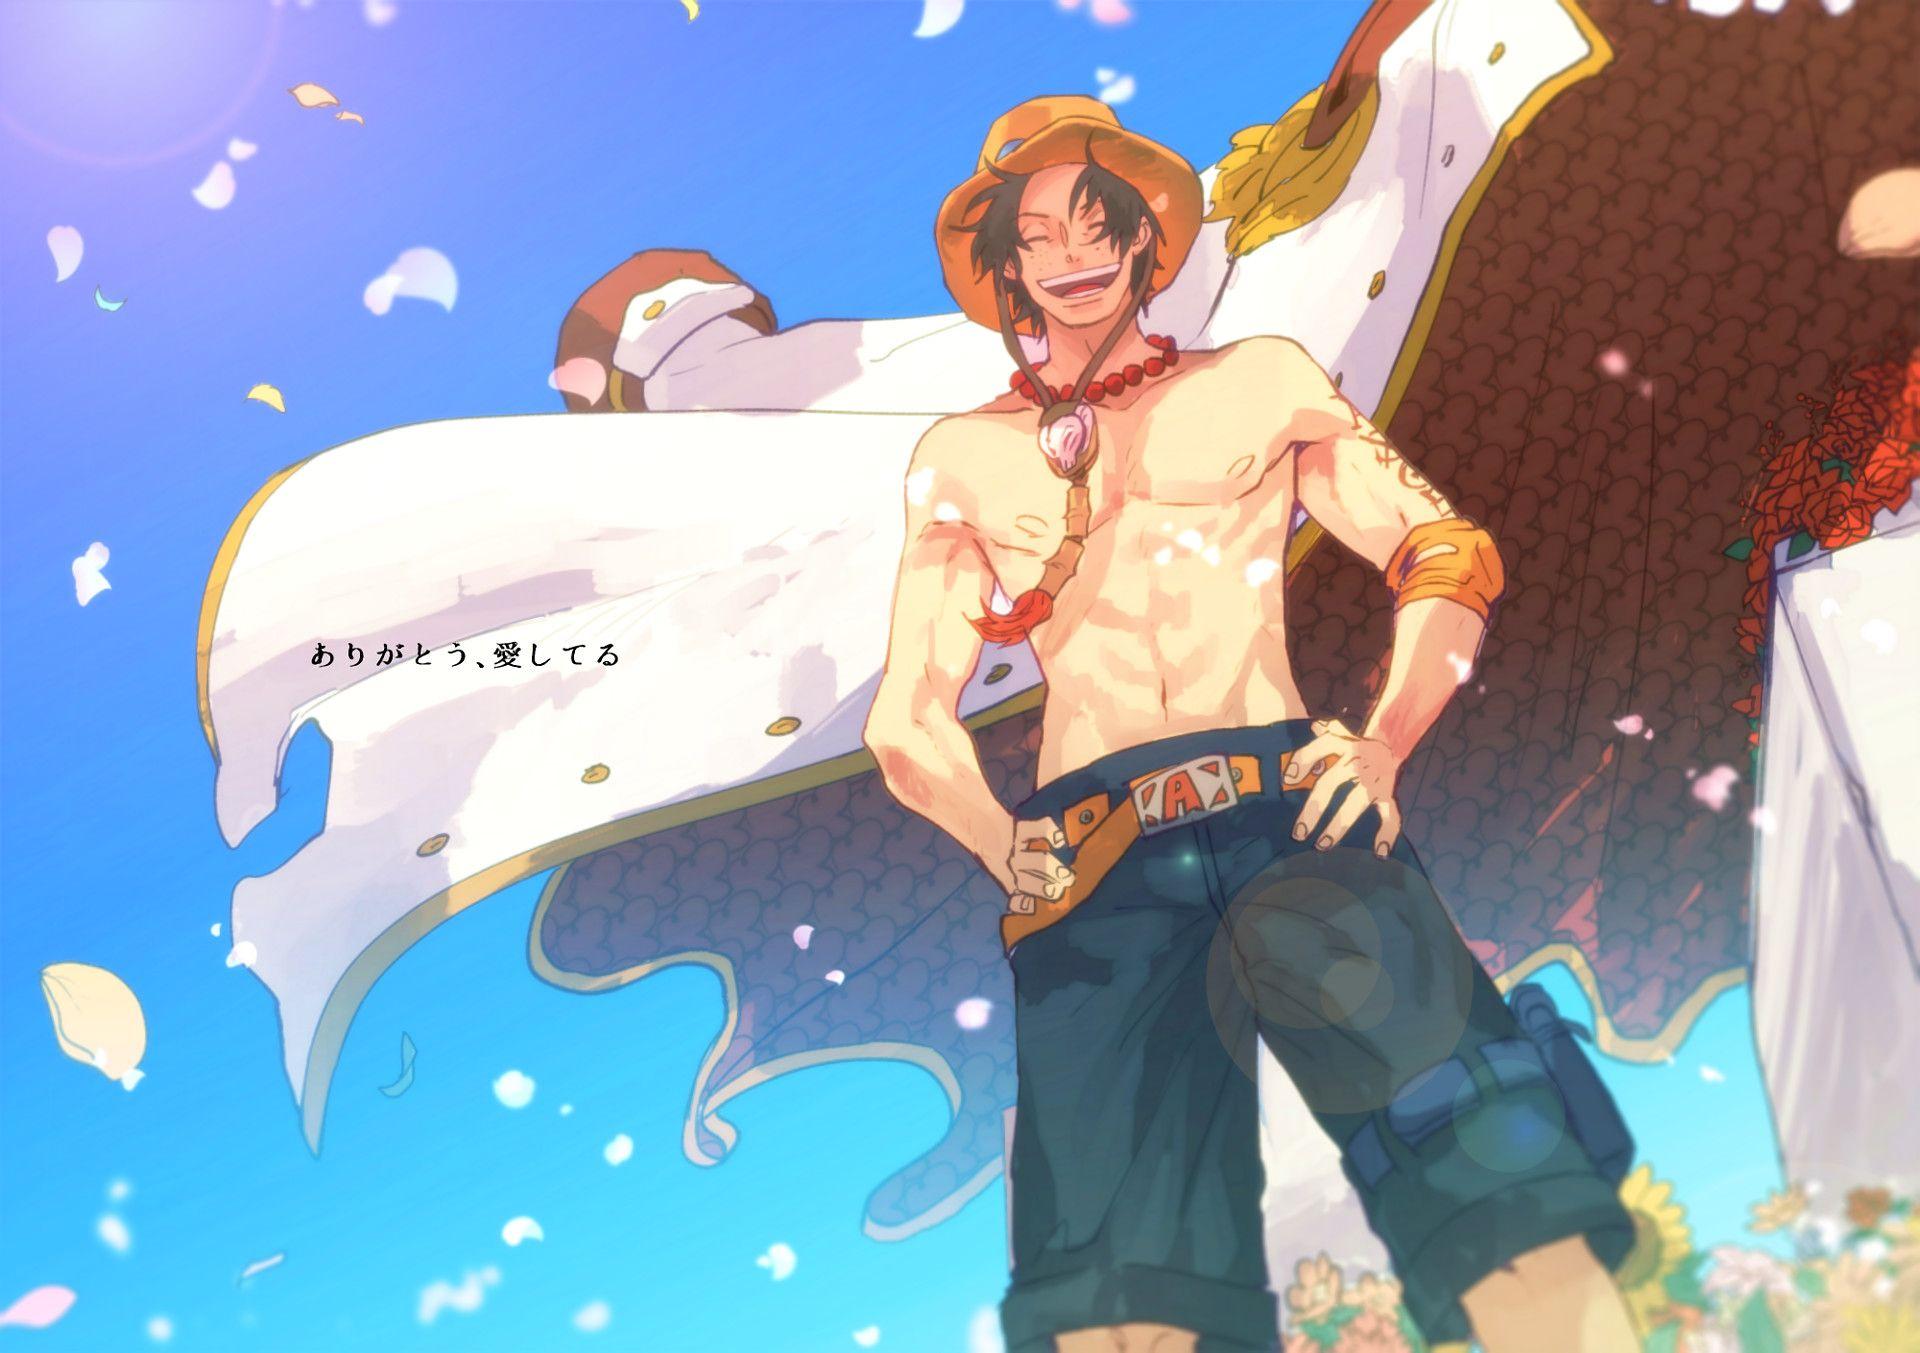 Aesthetic One Piece Ps4 Wallpapers - Wallpaper Cave